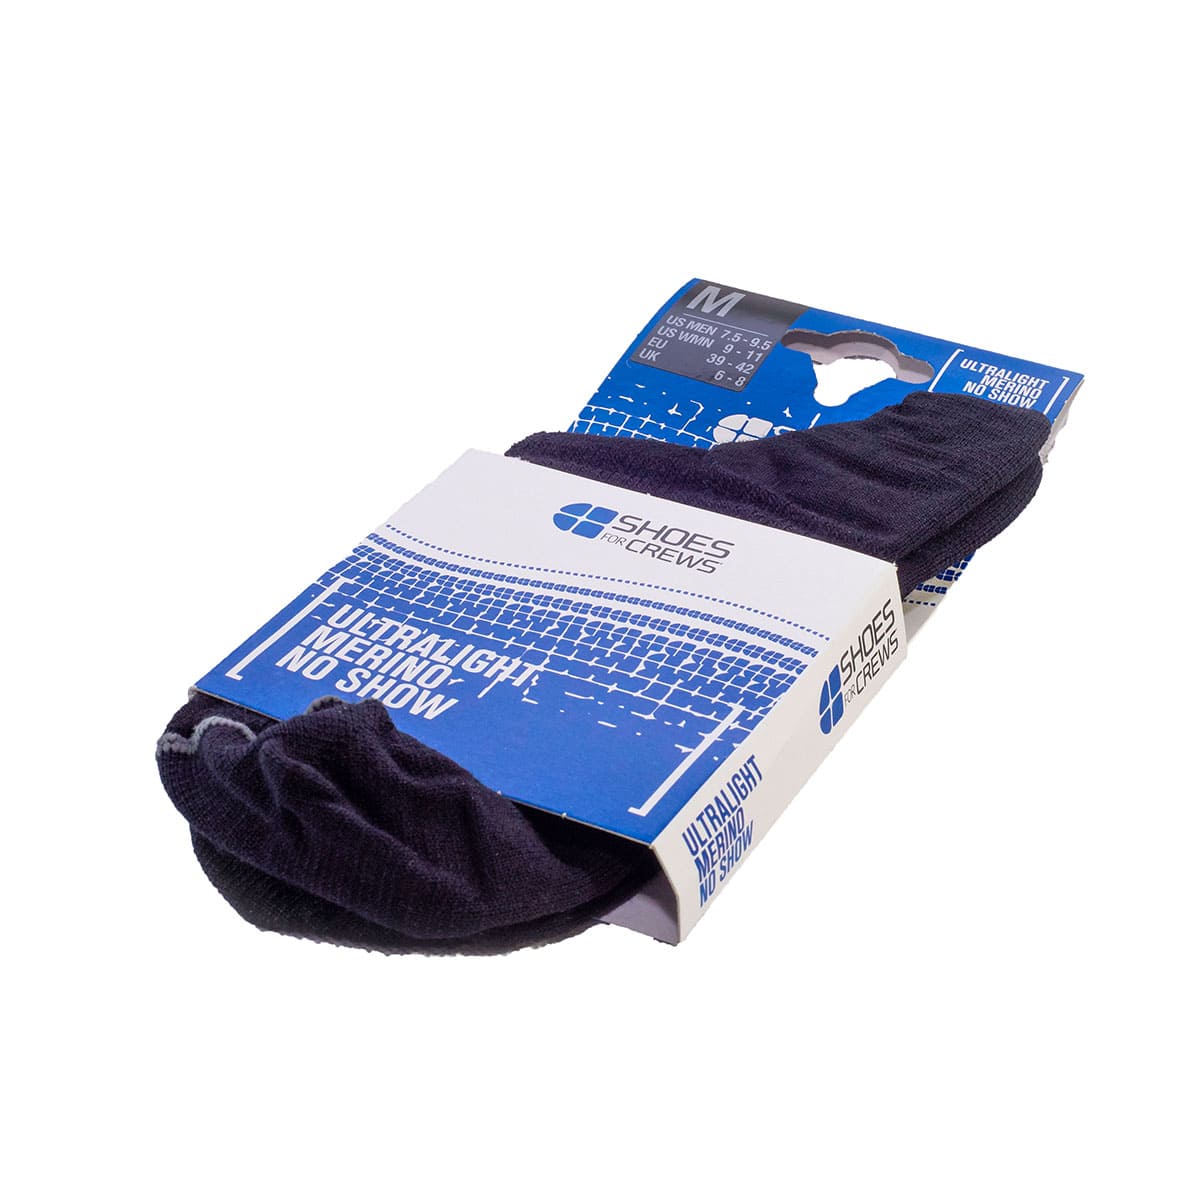 The No Show Merino Sock from Shoes For Crews offers the perfect combination of comfort, functionality and style, image of the packaging.